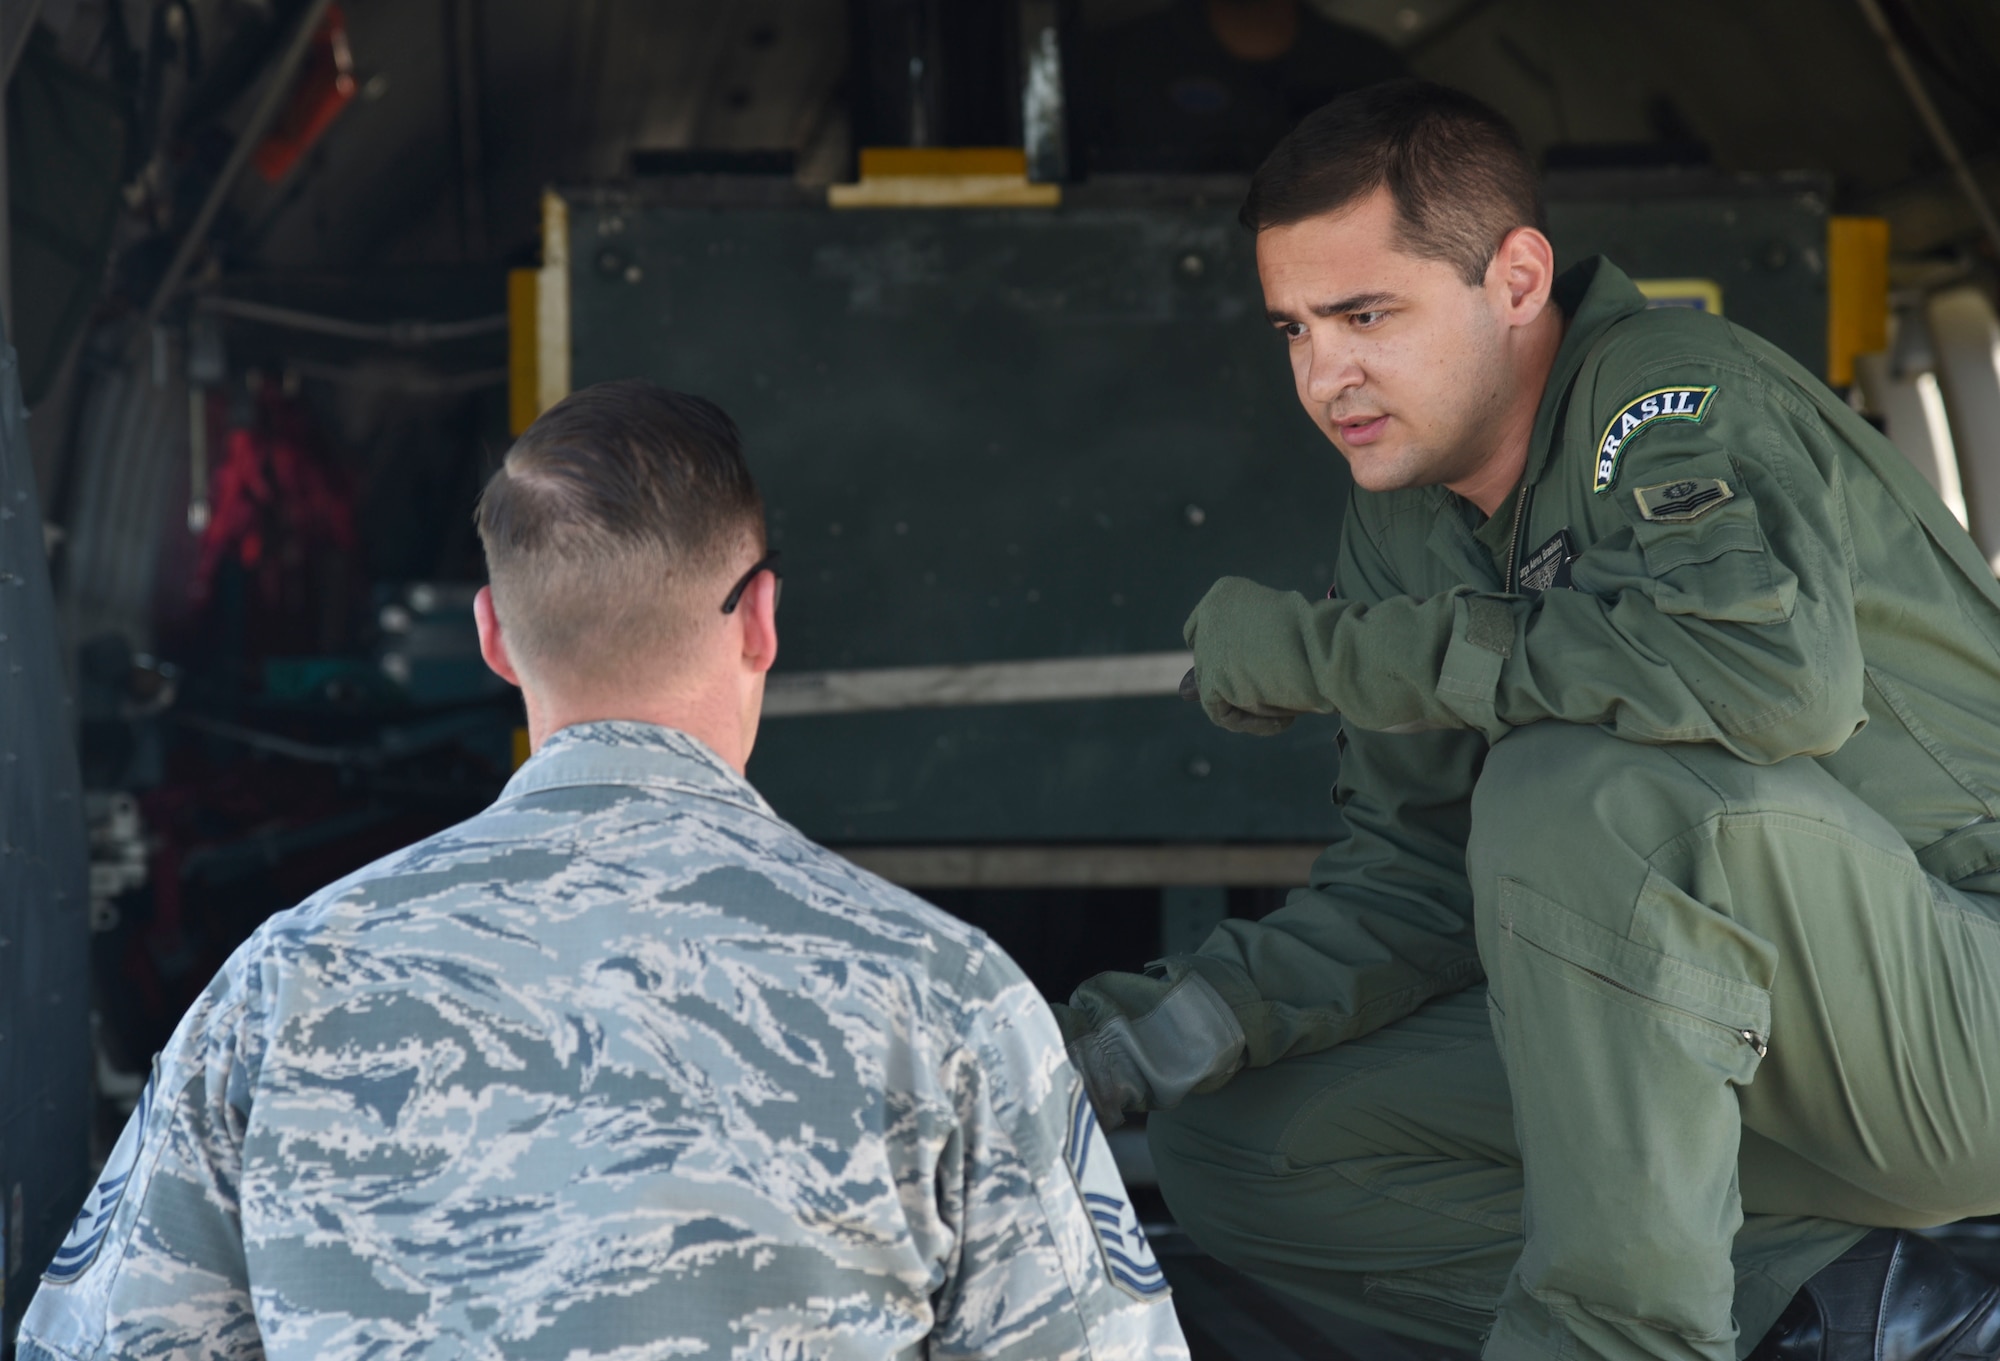 Senior Master Sgt. Joseph Wallis, 62nd Aircraft Maintenance Squadron lead production superintendent, talks with a member of the Brazilian air force's 5th Wing at Joint Base Lewis-McChord, Wash., July 29, 2017. More than 3,000 Airmen, Soldiers, Sailors, Marines and international partners converged on the state of Washington in support of Mobility Guardian. The exercise is intended to test the abilities of the Mobility Air Forces to execute rapid global mobility missions in dynamic, contested environments. Mobility Guardian is Air Mobility Command's premier exercise, providing an opportunity for the Mobility Air Forces to train with joint and international partners in airlift, air refueling, aeromedical evacuation and mobility support. (U.S. Air Force photo by Airman 1st Class Erin McClellan)